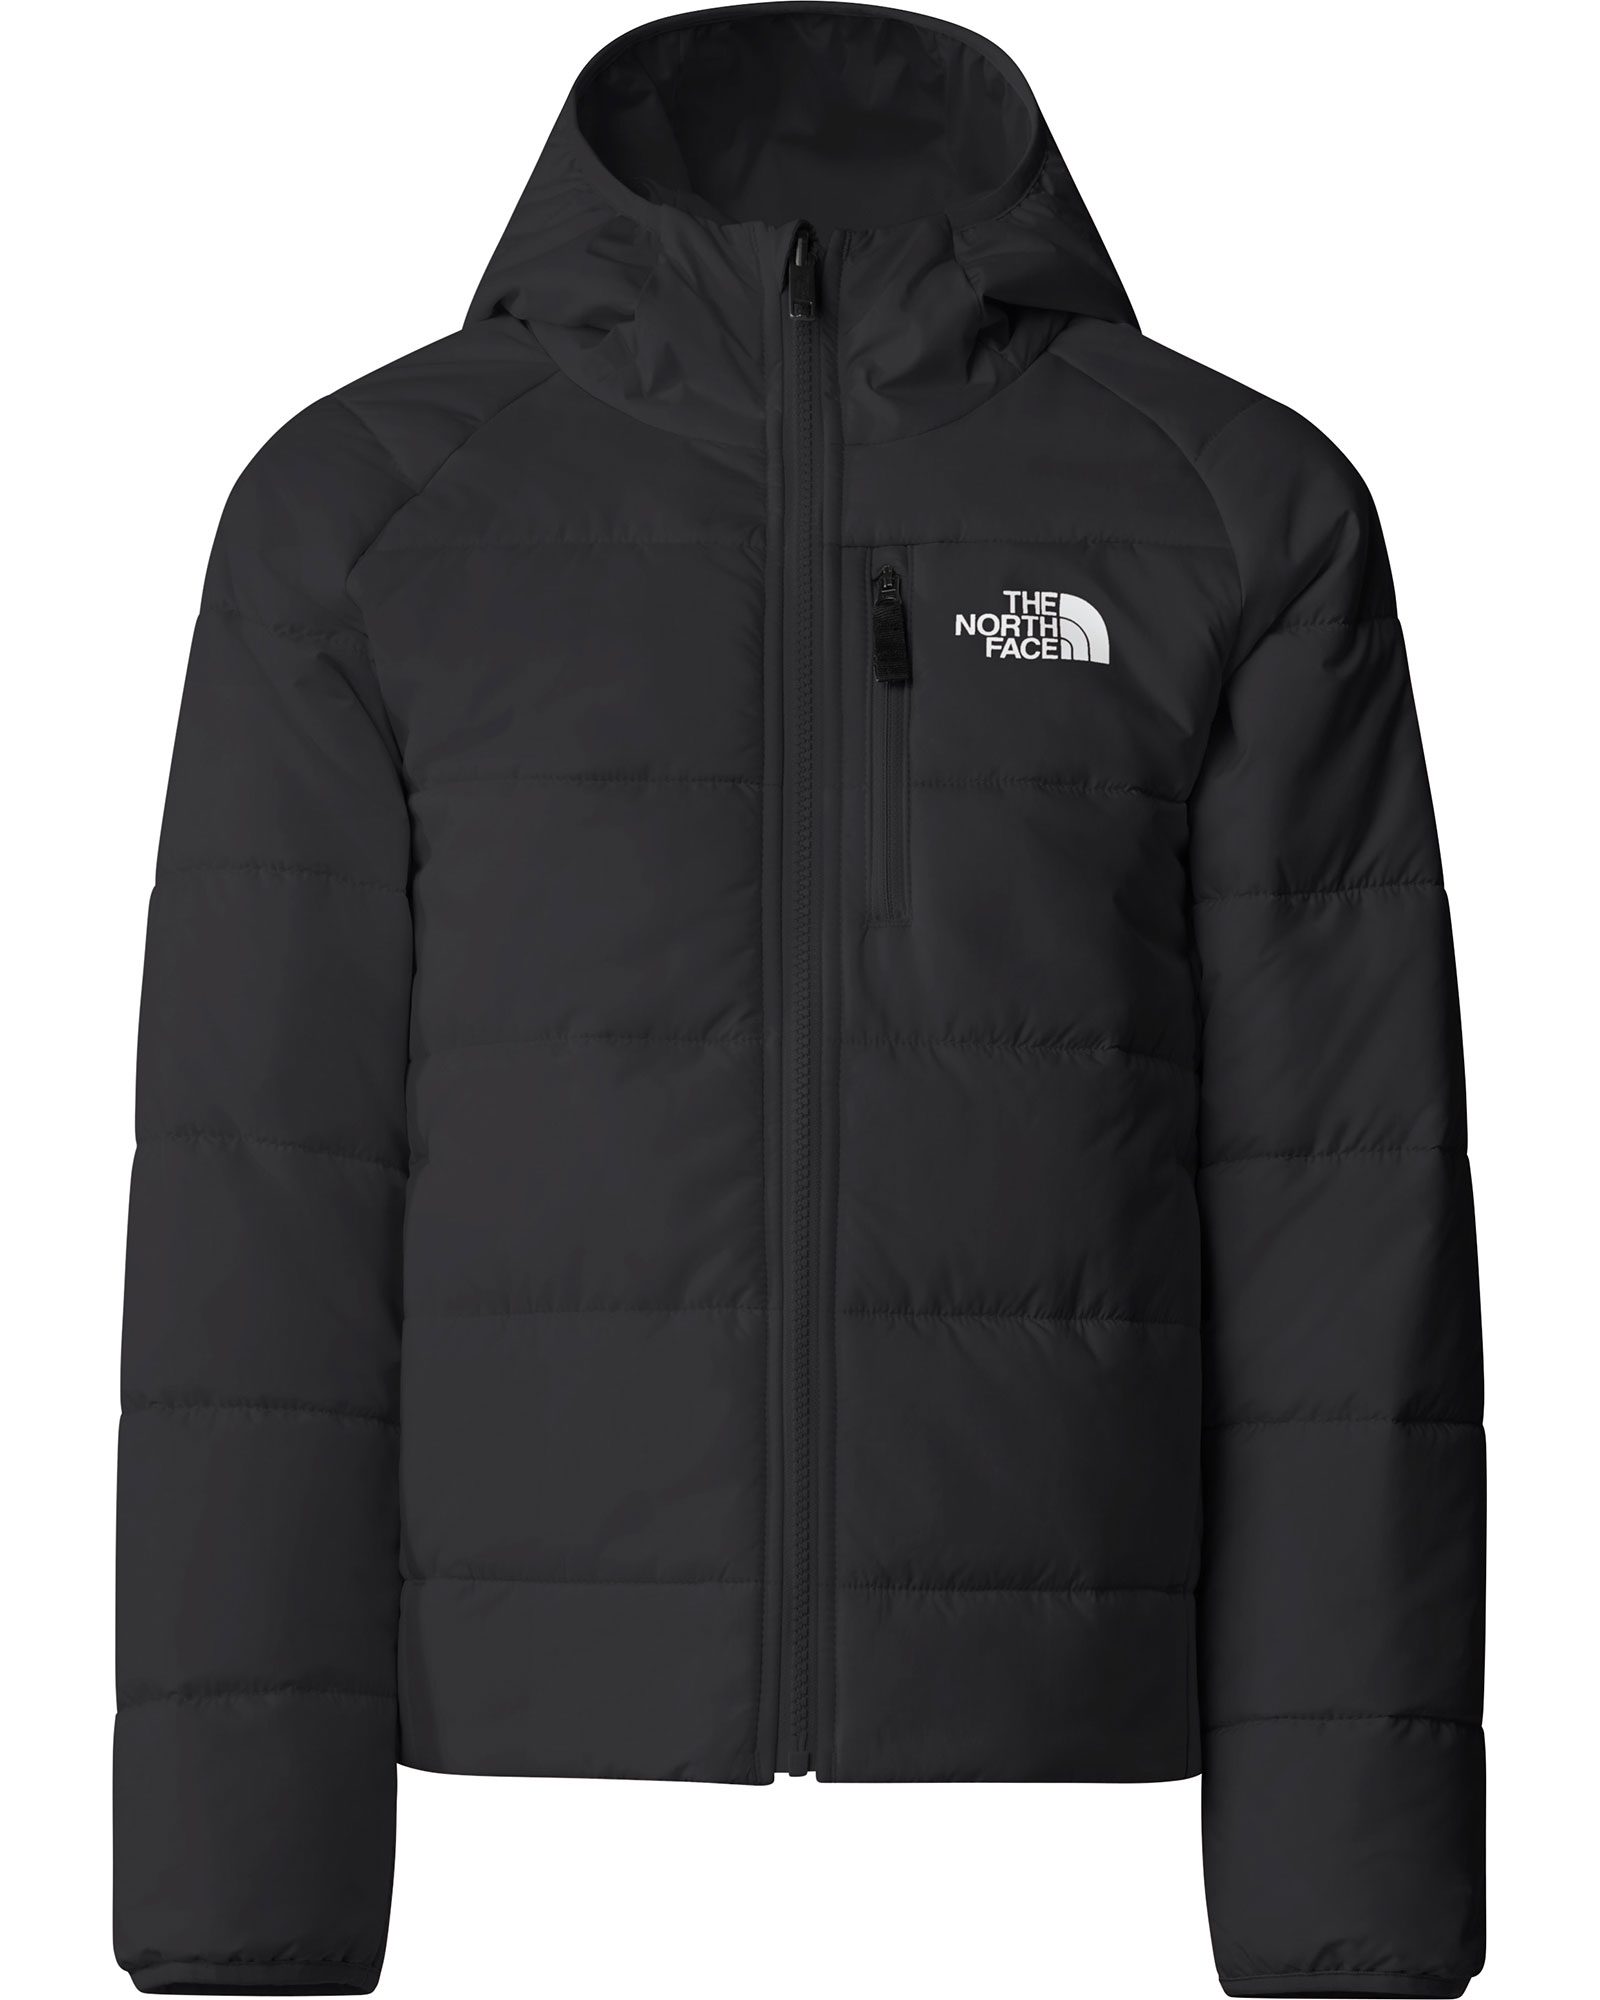 Product image of The North Face Girl's Reversible Perrito Jacket XL